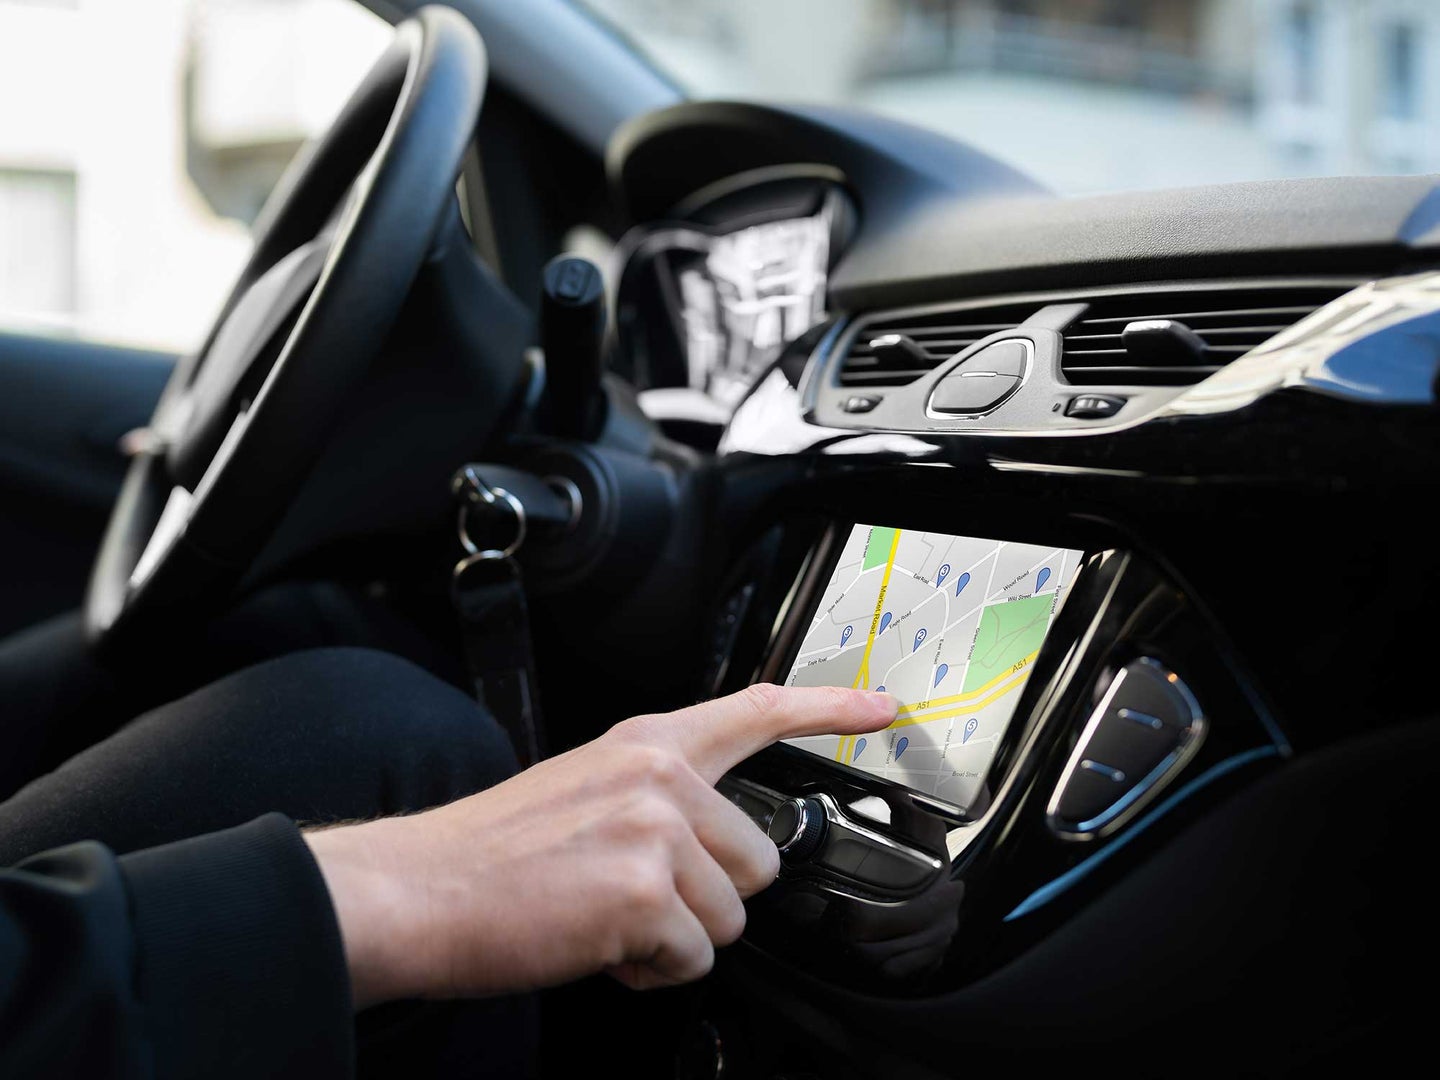 You car could be collecting troves of data, including GPS tracking, and sending it to the automaker, who in turn, sends it to third parties beyond your control.